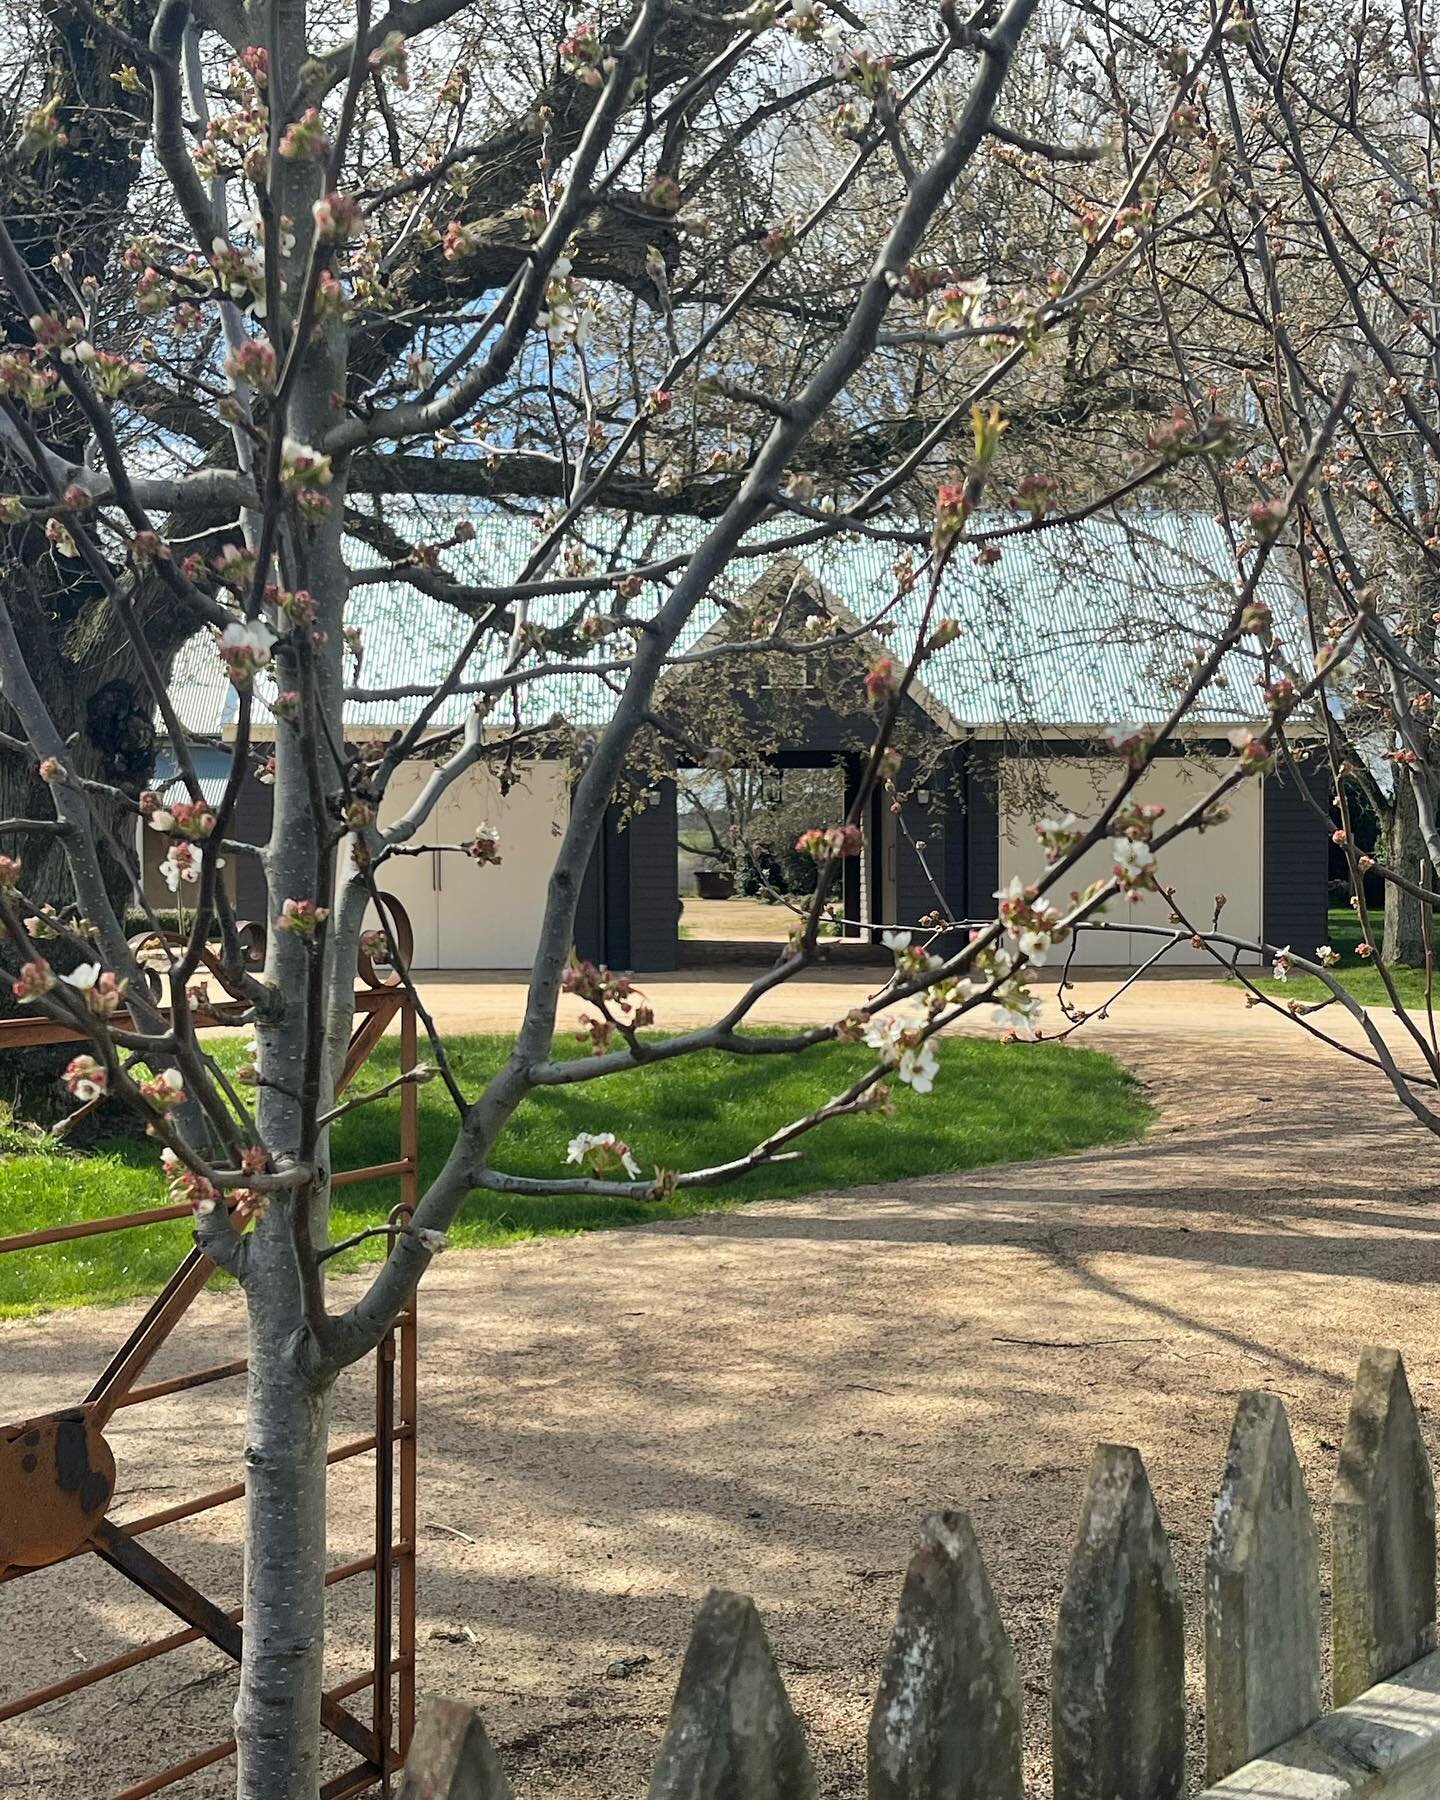 Such a glorious afternoon here at Ceres Homestead&hellip; ignoring the chilly wind, the sunshine gave a hint that it could be Spring!?? xxx